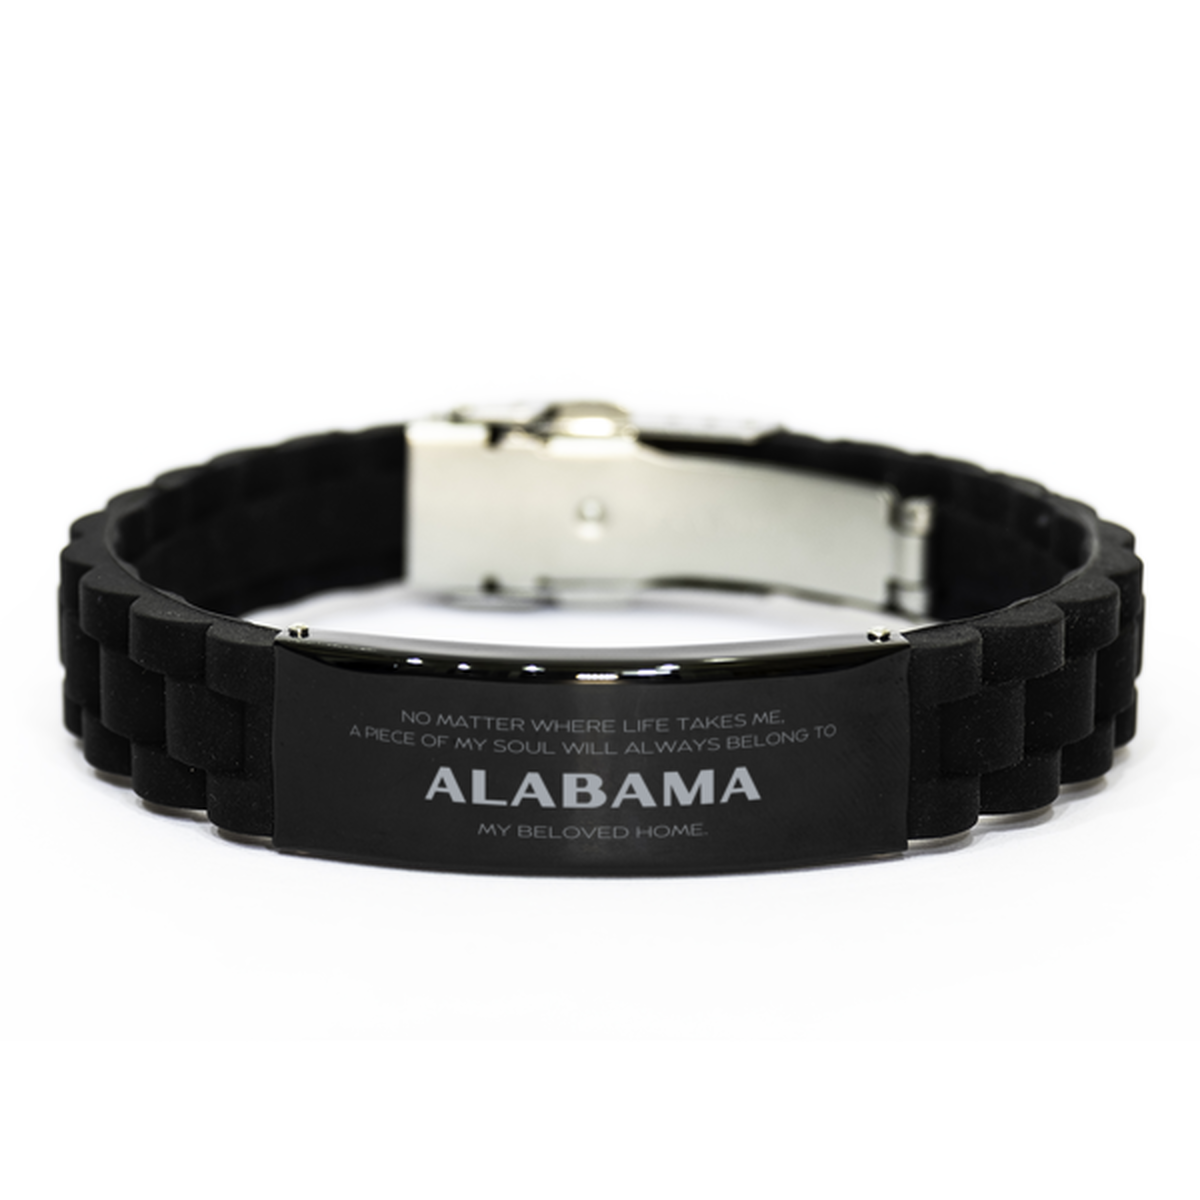 Love Alabama State Gifts, My soul will always belong to Alabama, Proud Black Glidelock Clasp Bracelet, Birthday Unique Gifts For Alabama Men, Women, Friends